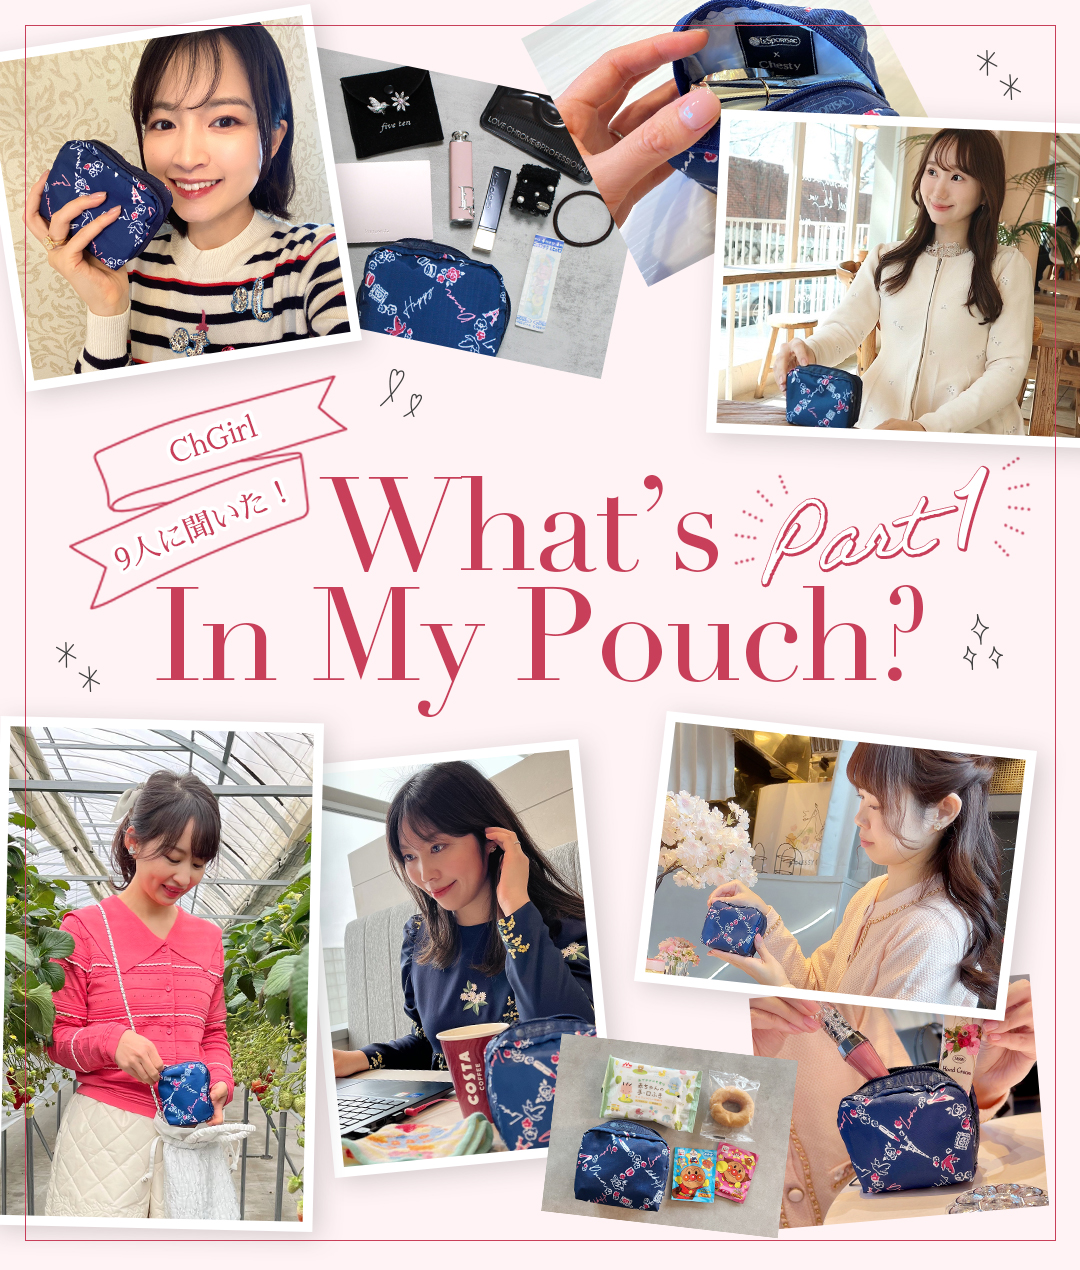 ChGirl9人に聞いた！What's What's In My Pouch？Part1